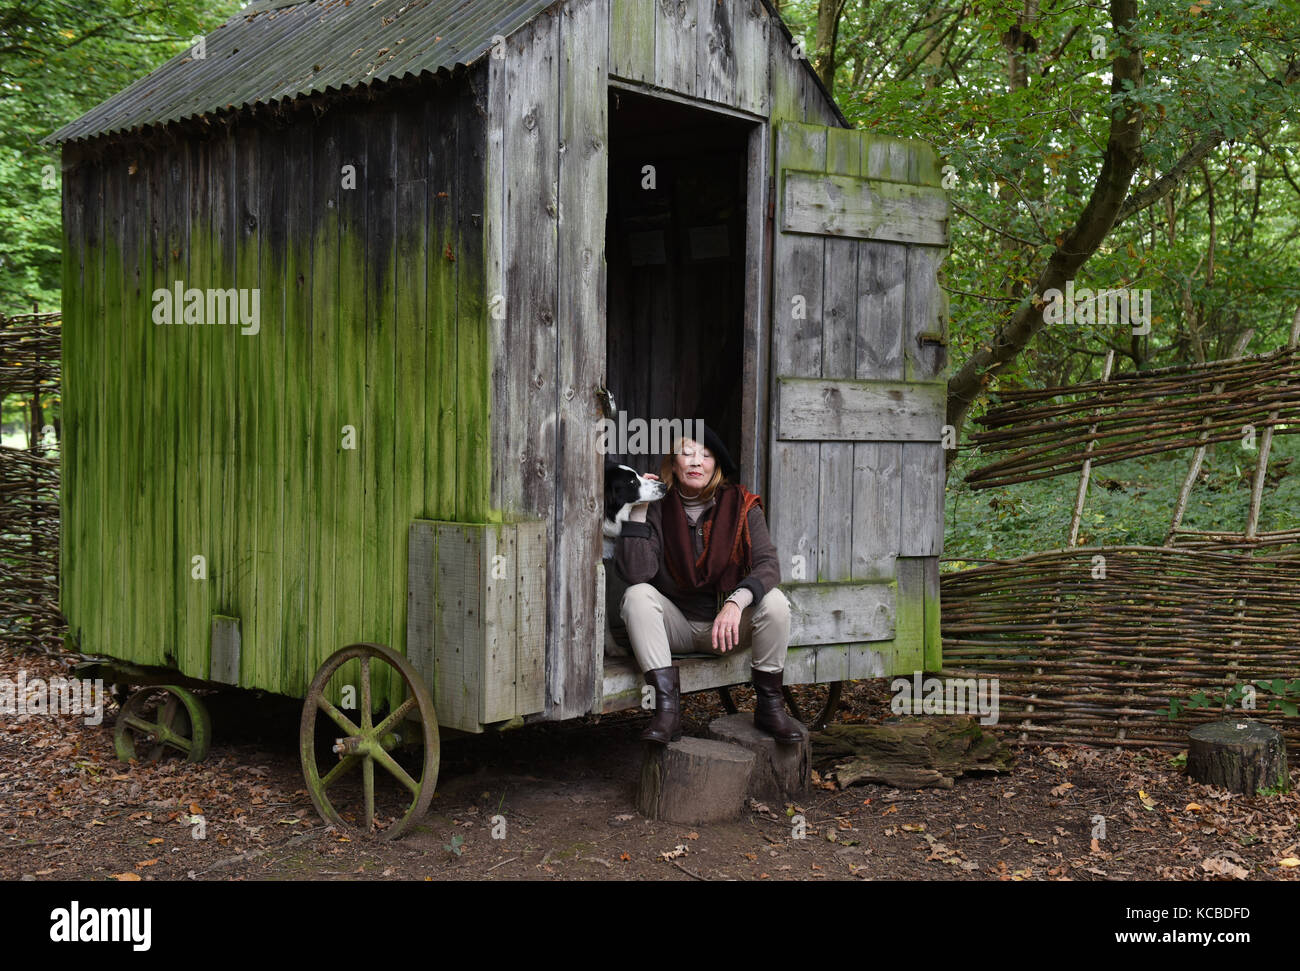 Woman relaxing with pet border collie dog at woodland garden shed on wheels Britain Uk secluded seclusion isolation hideaway rural retreat Stock Photo